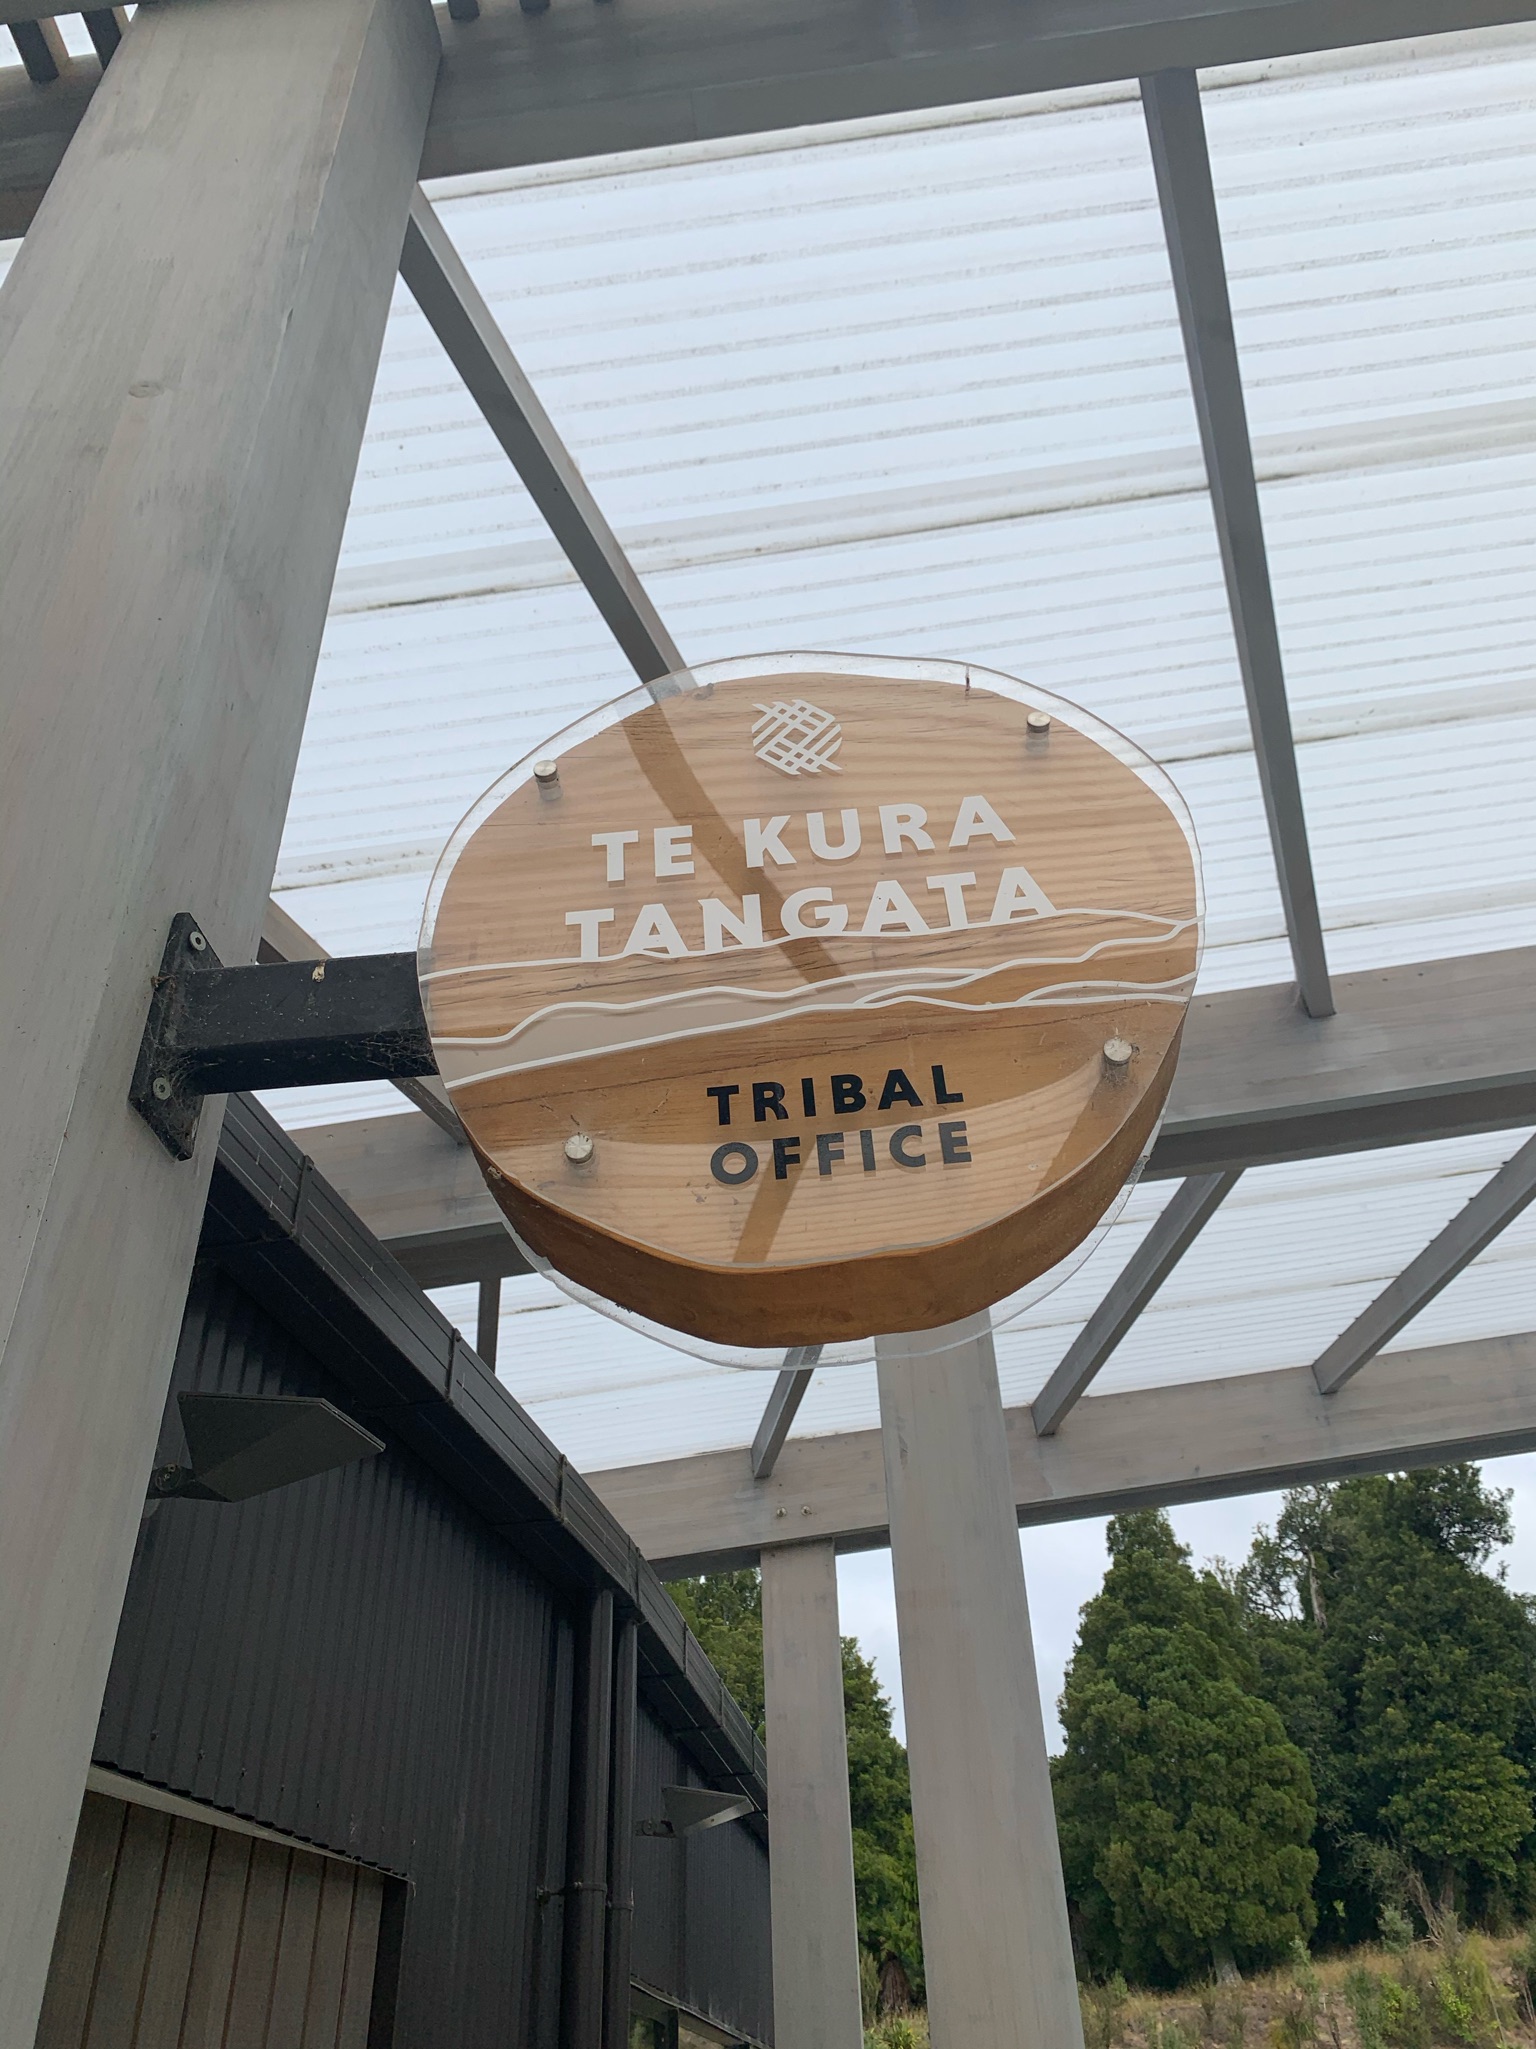 Bilingual signage of a tribal office